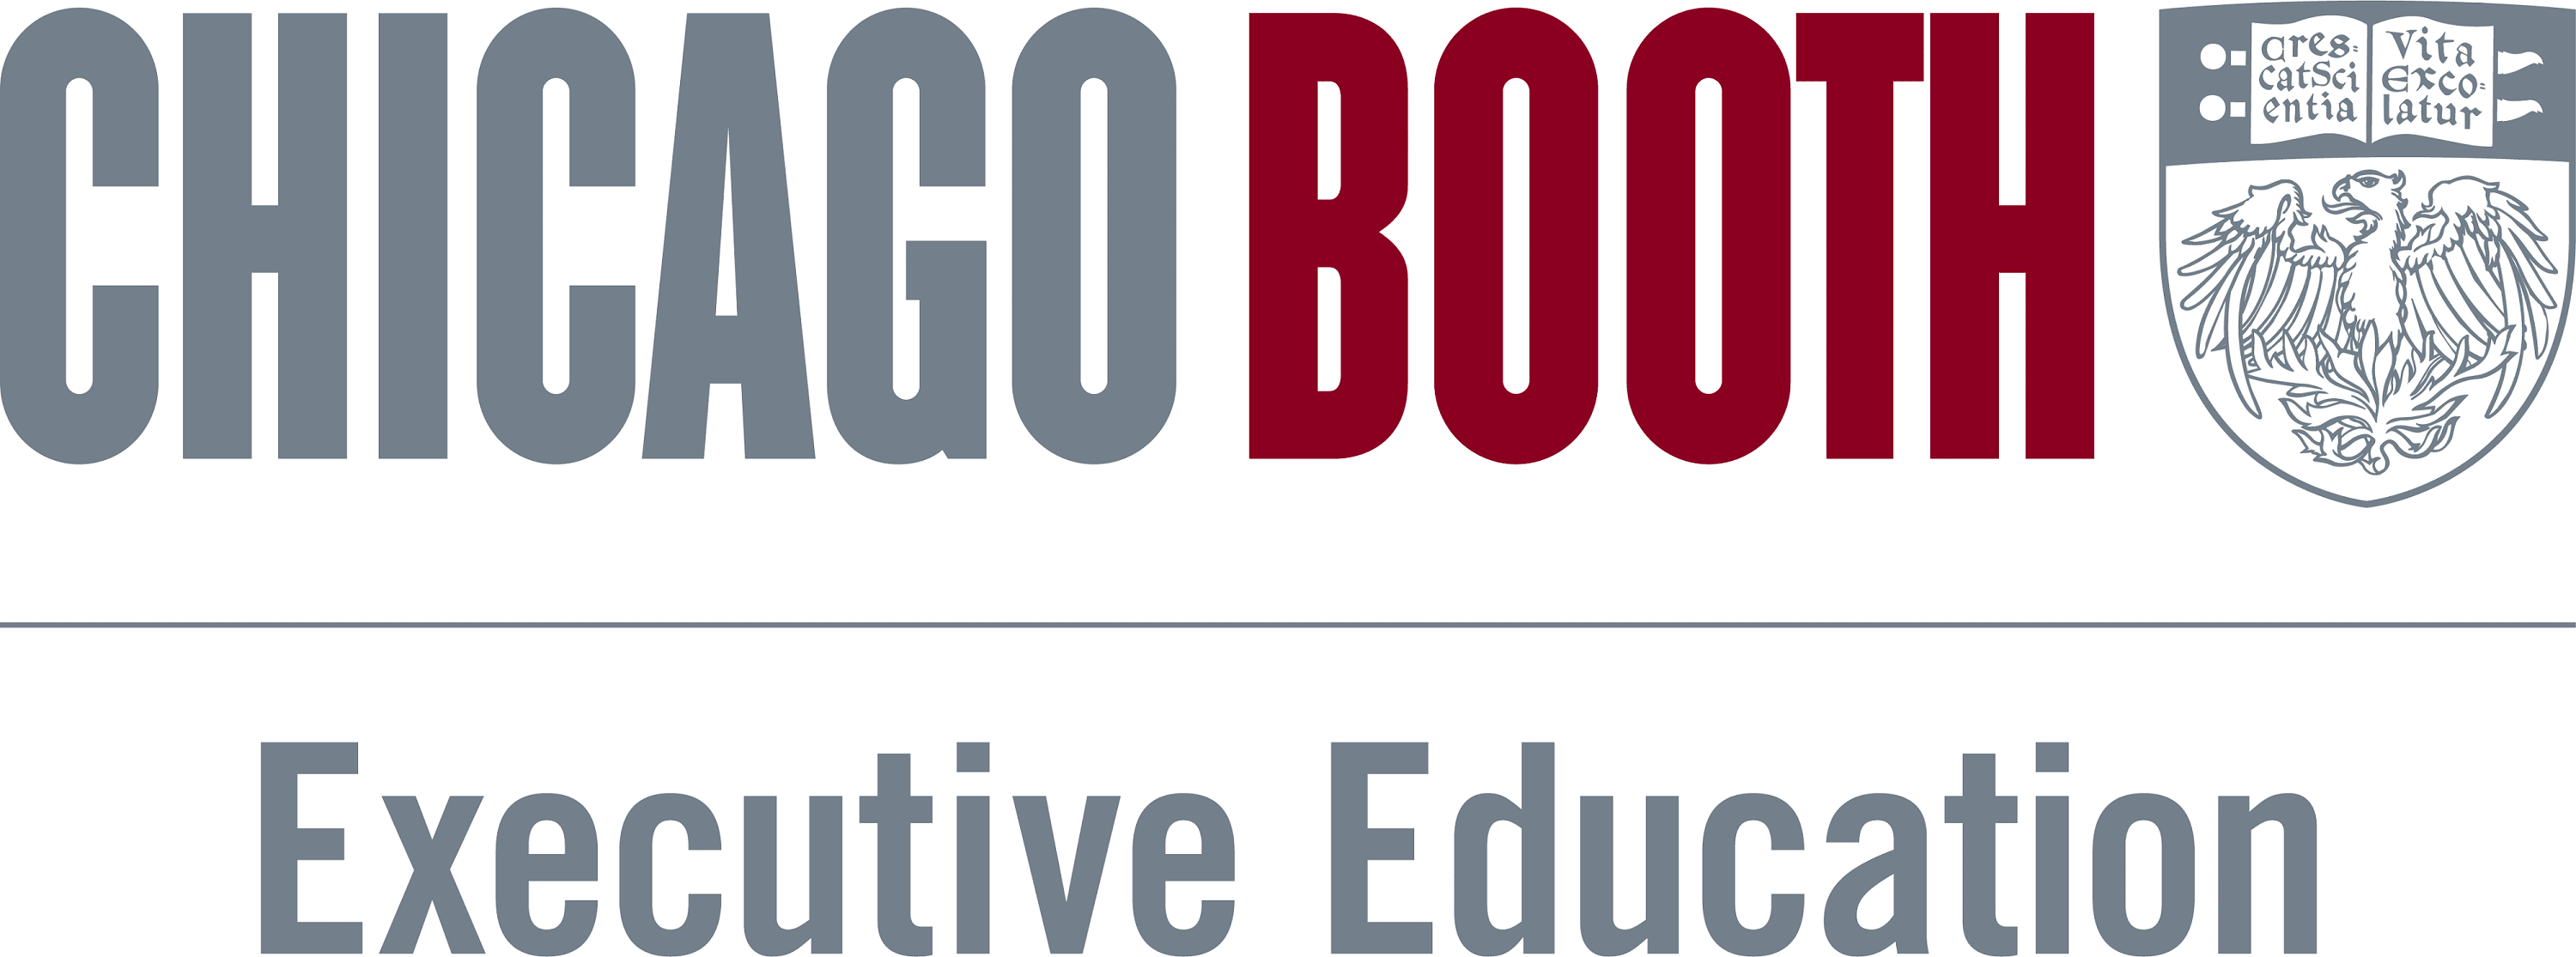 Booth School of Business - University of Chicago